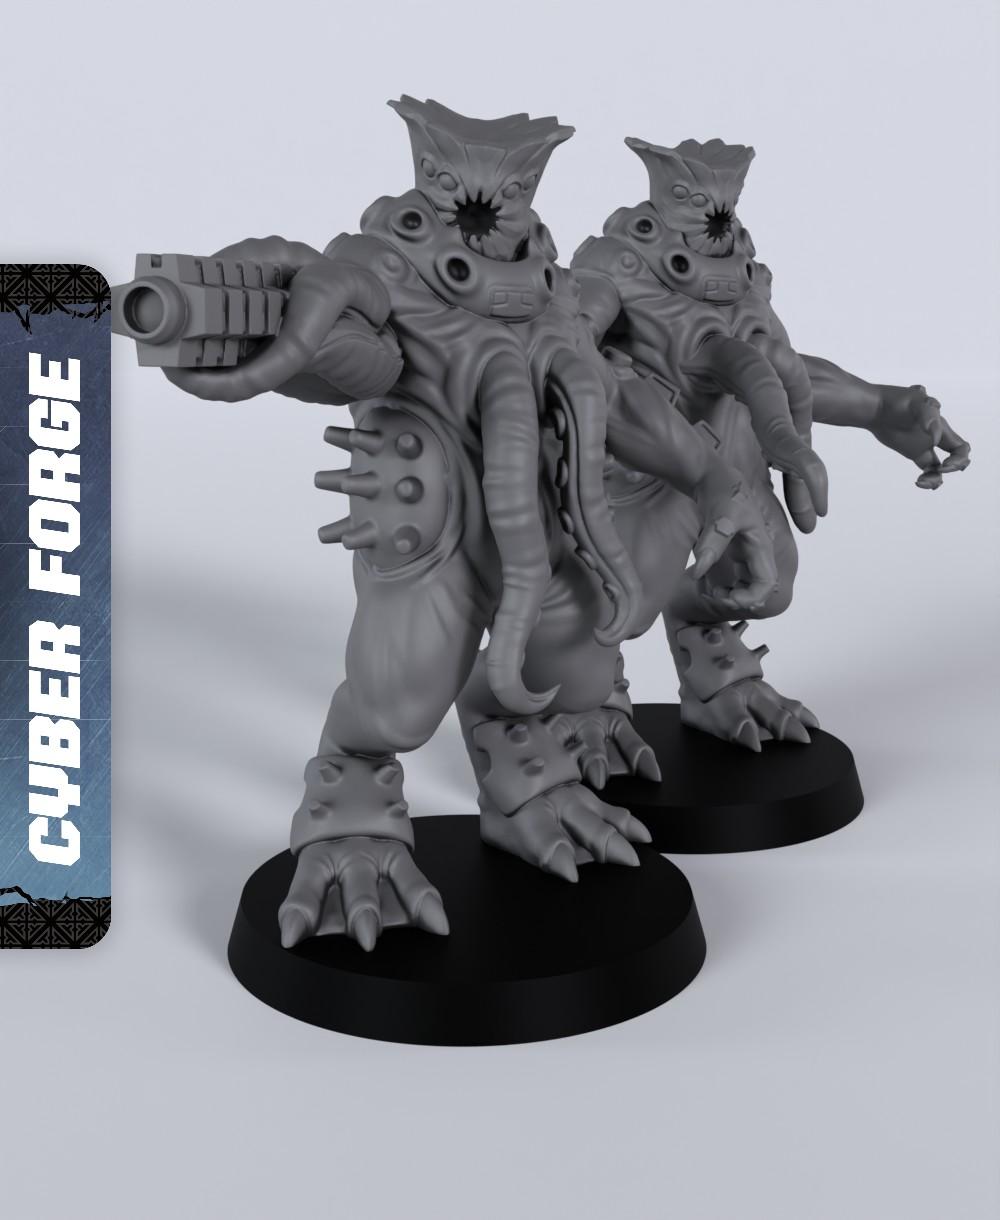 Painers - With Free Cyberpunk Warhammer - 40k Sci-Fi Gift Ideas for RPG and Wargamers 3d model